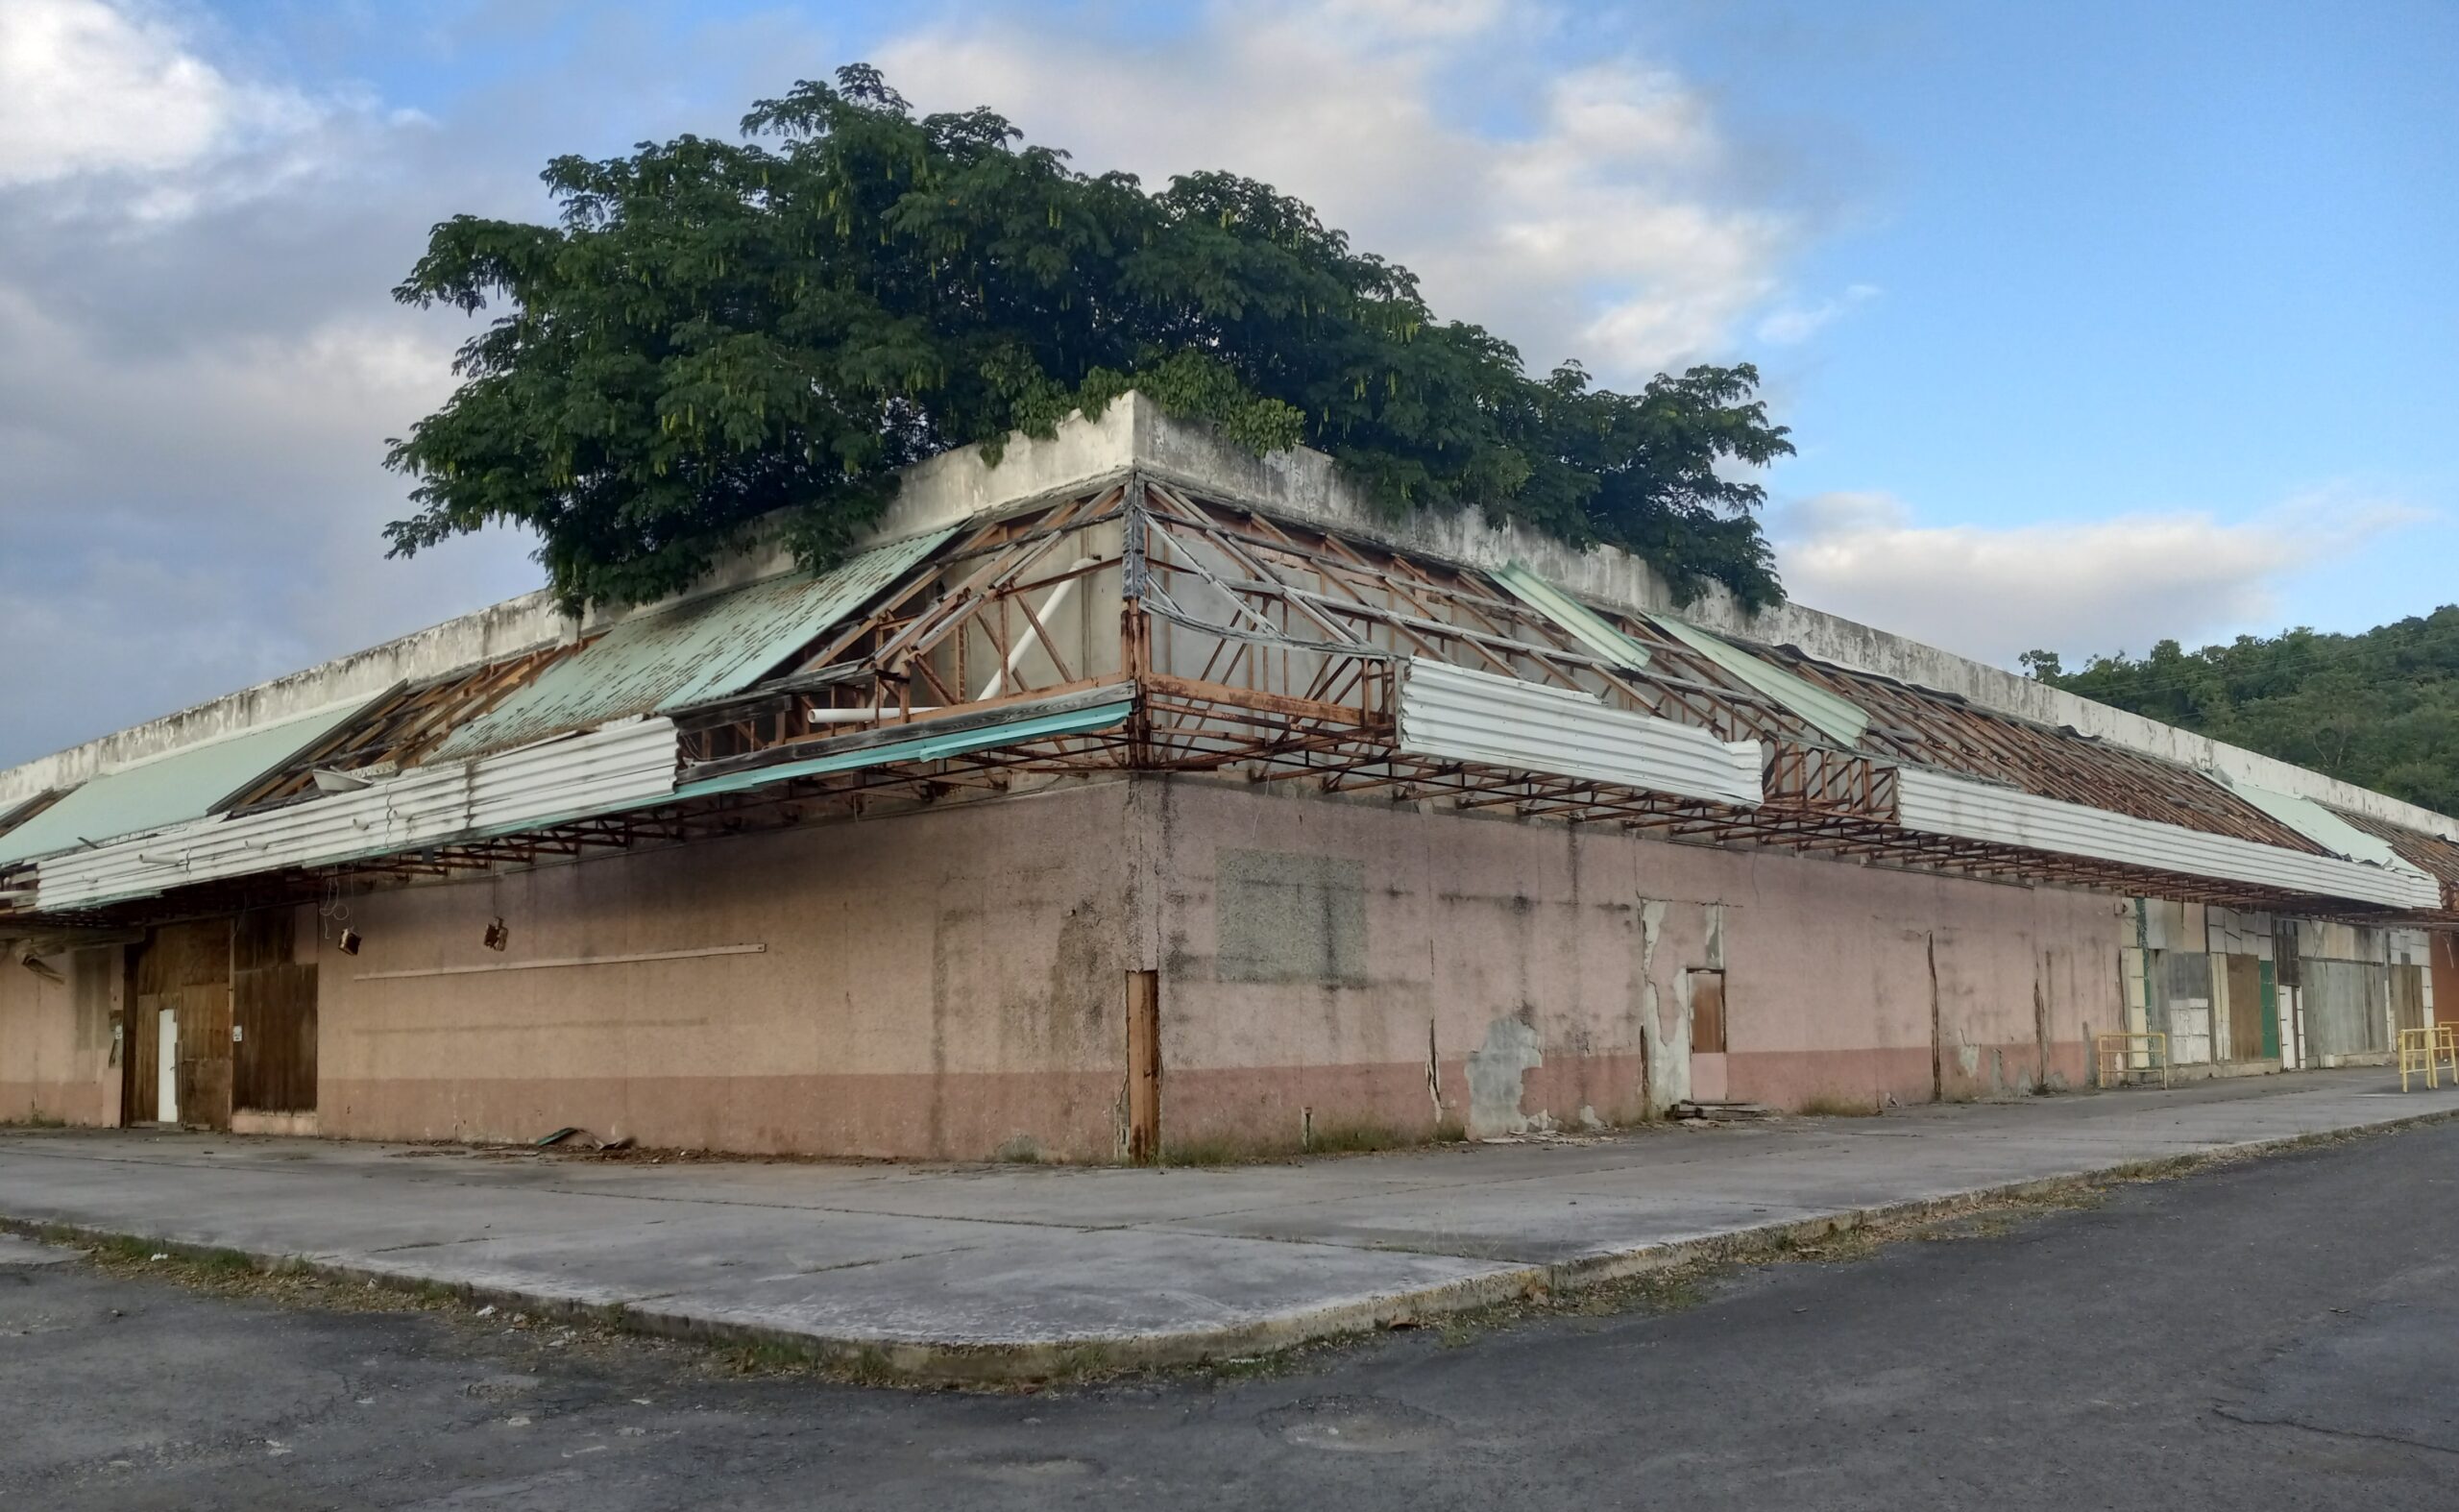 The La Reine shopping center on St. Croix, with trees growing through the building. (Photo by Olasee Davis)